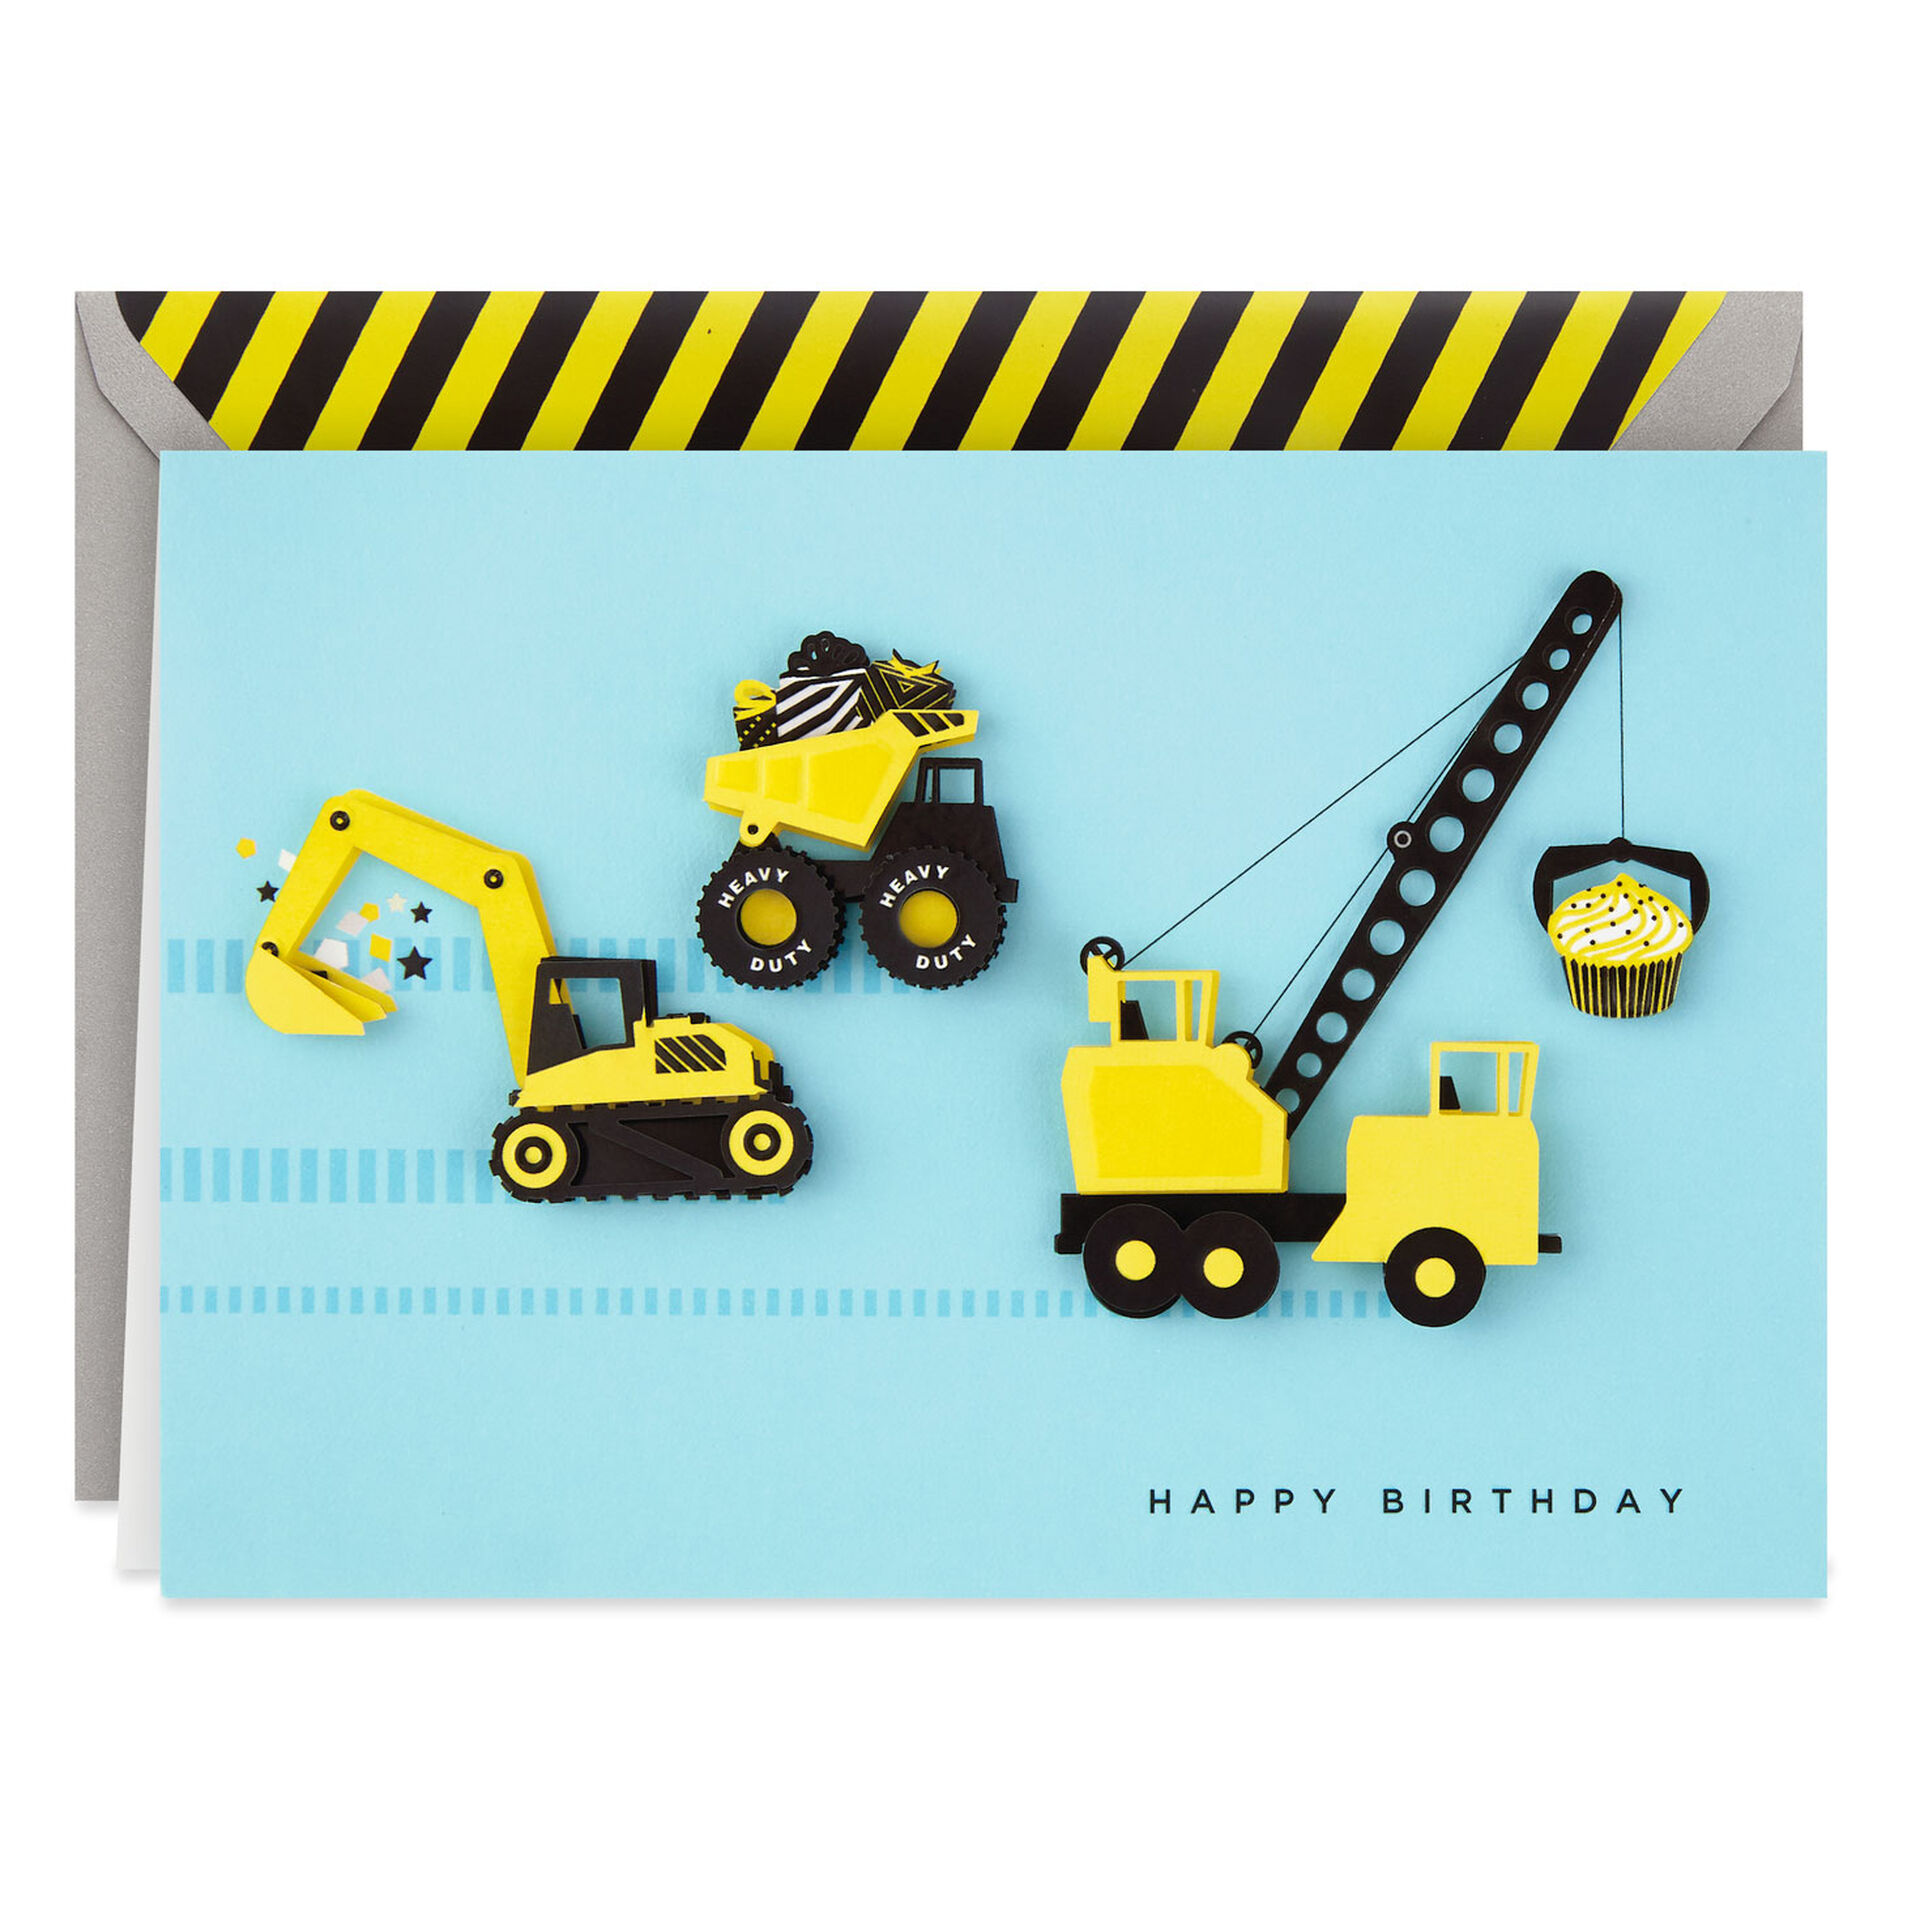 Loads-of-Fun-Birthday-Card-for-Kids_599LAD9864_01